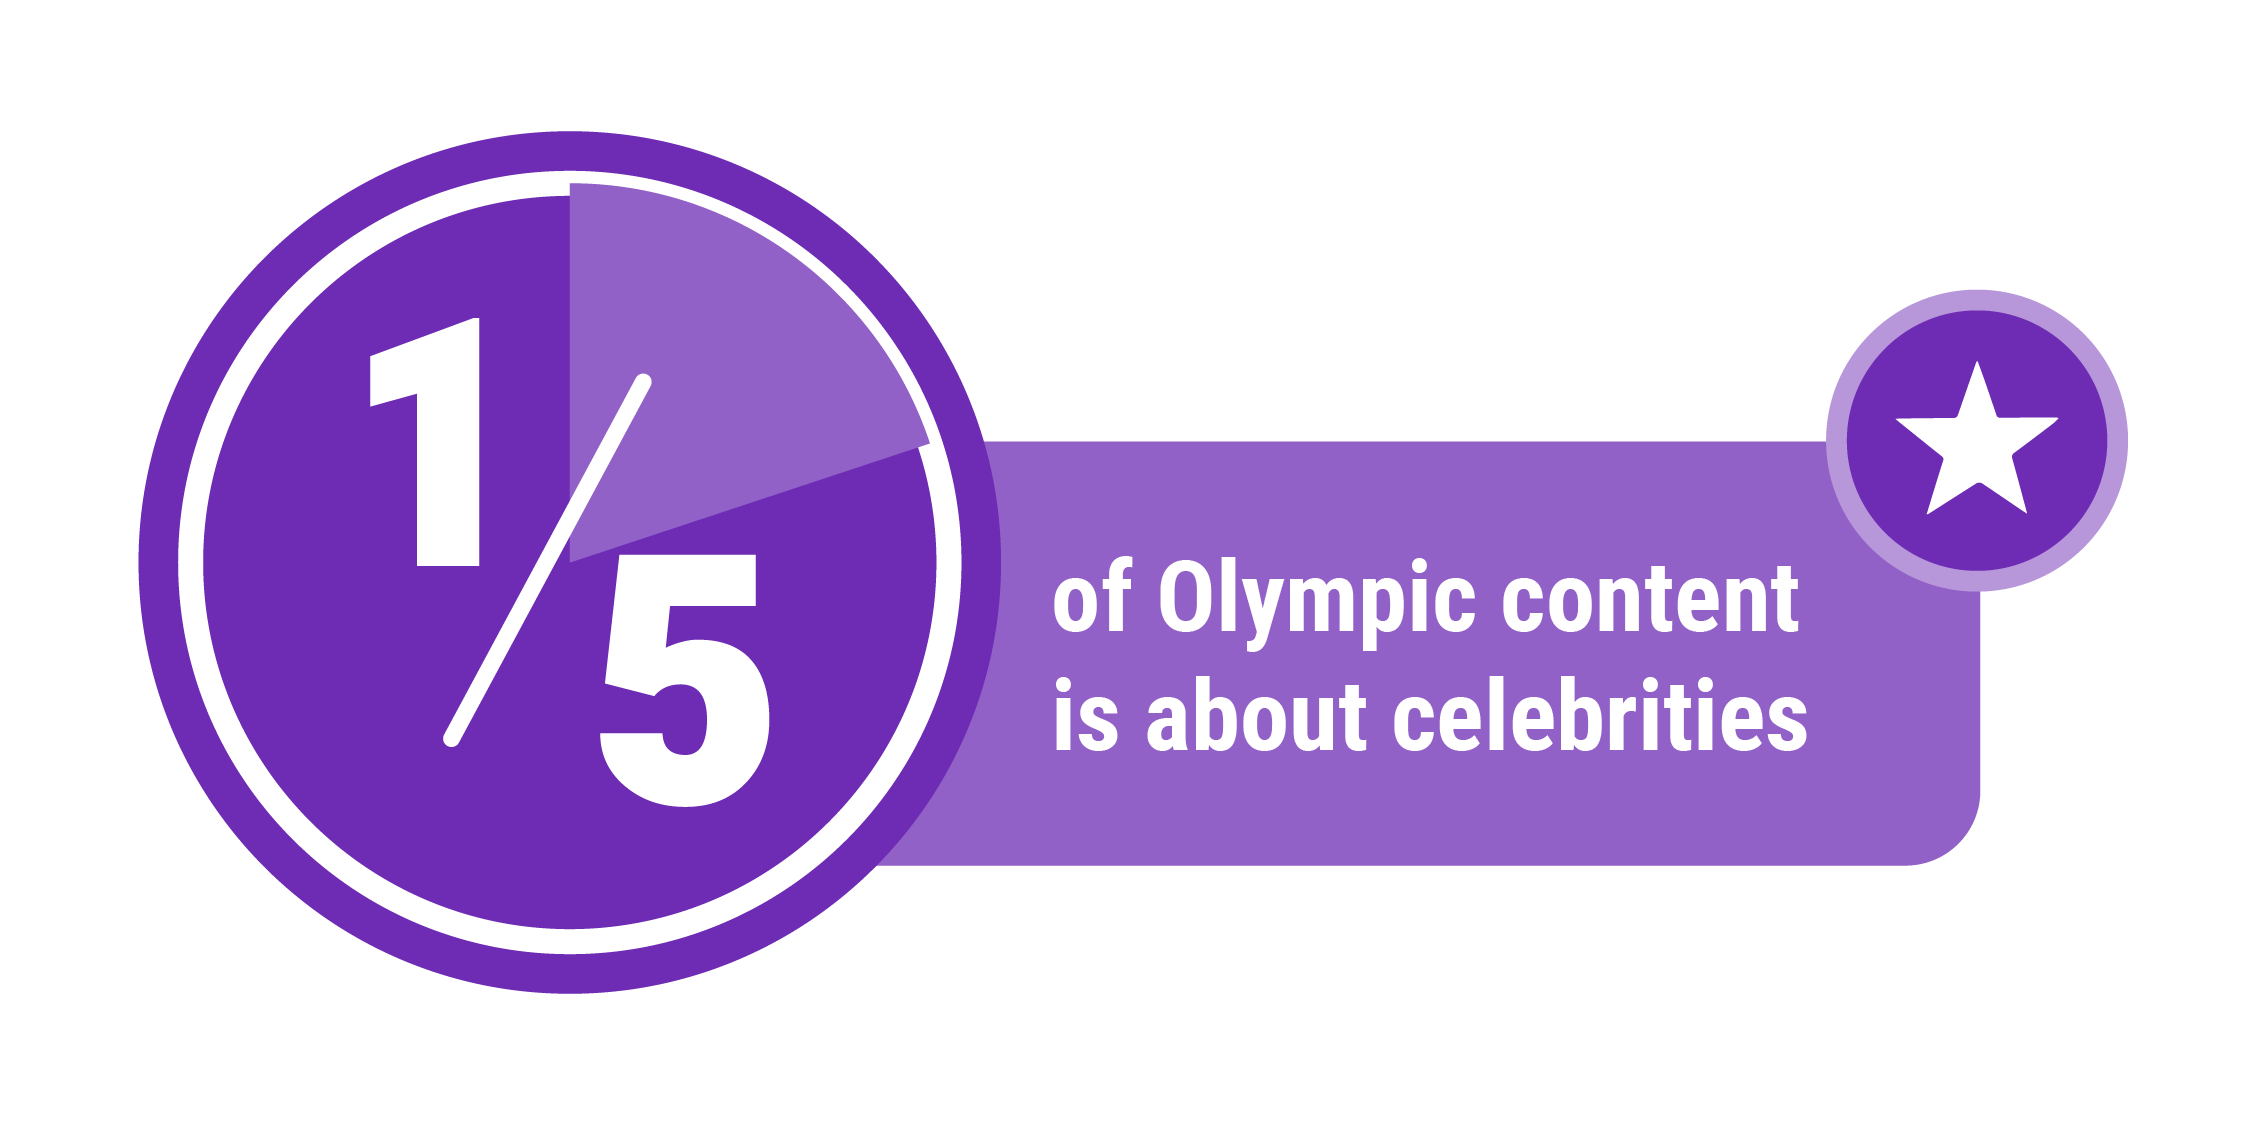 Simple data visualization in the color purple saying that one-fifth of olympic content is about celebrities.